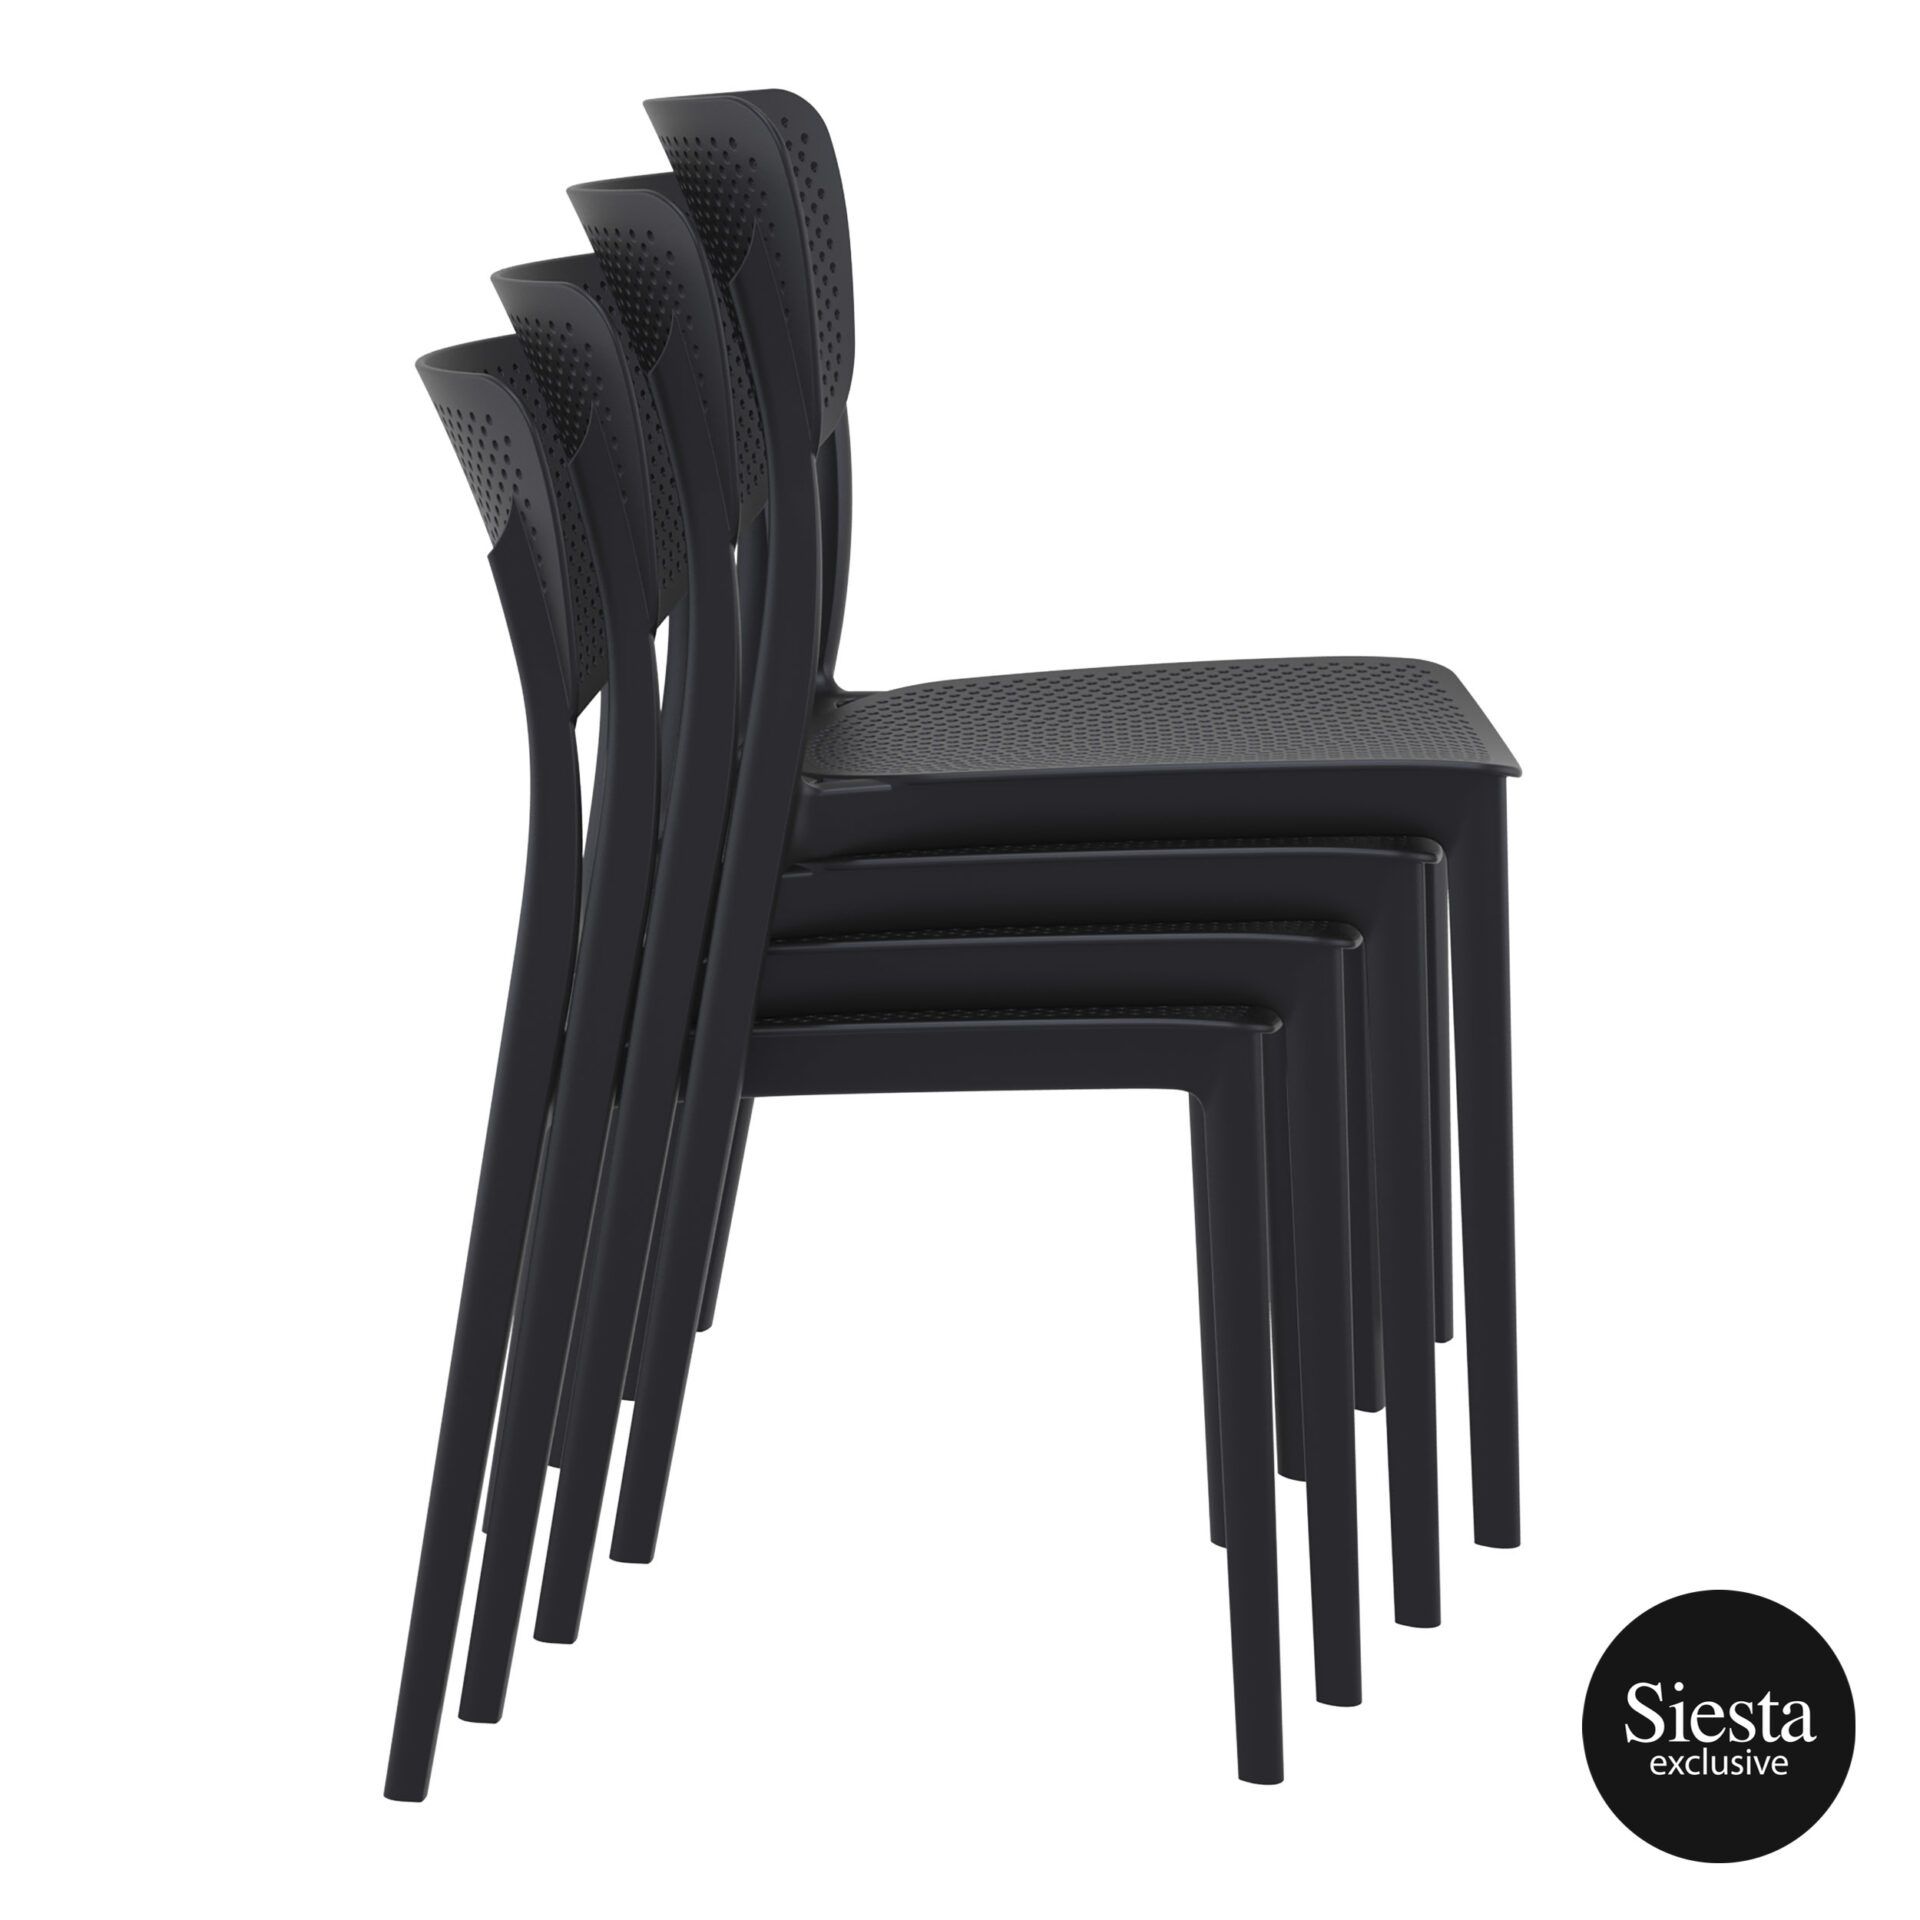 polypropylene hospitality seating lucy chair stack 1